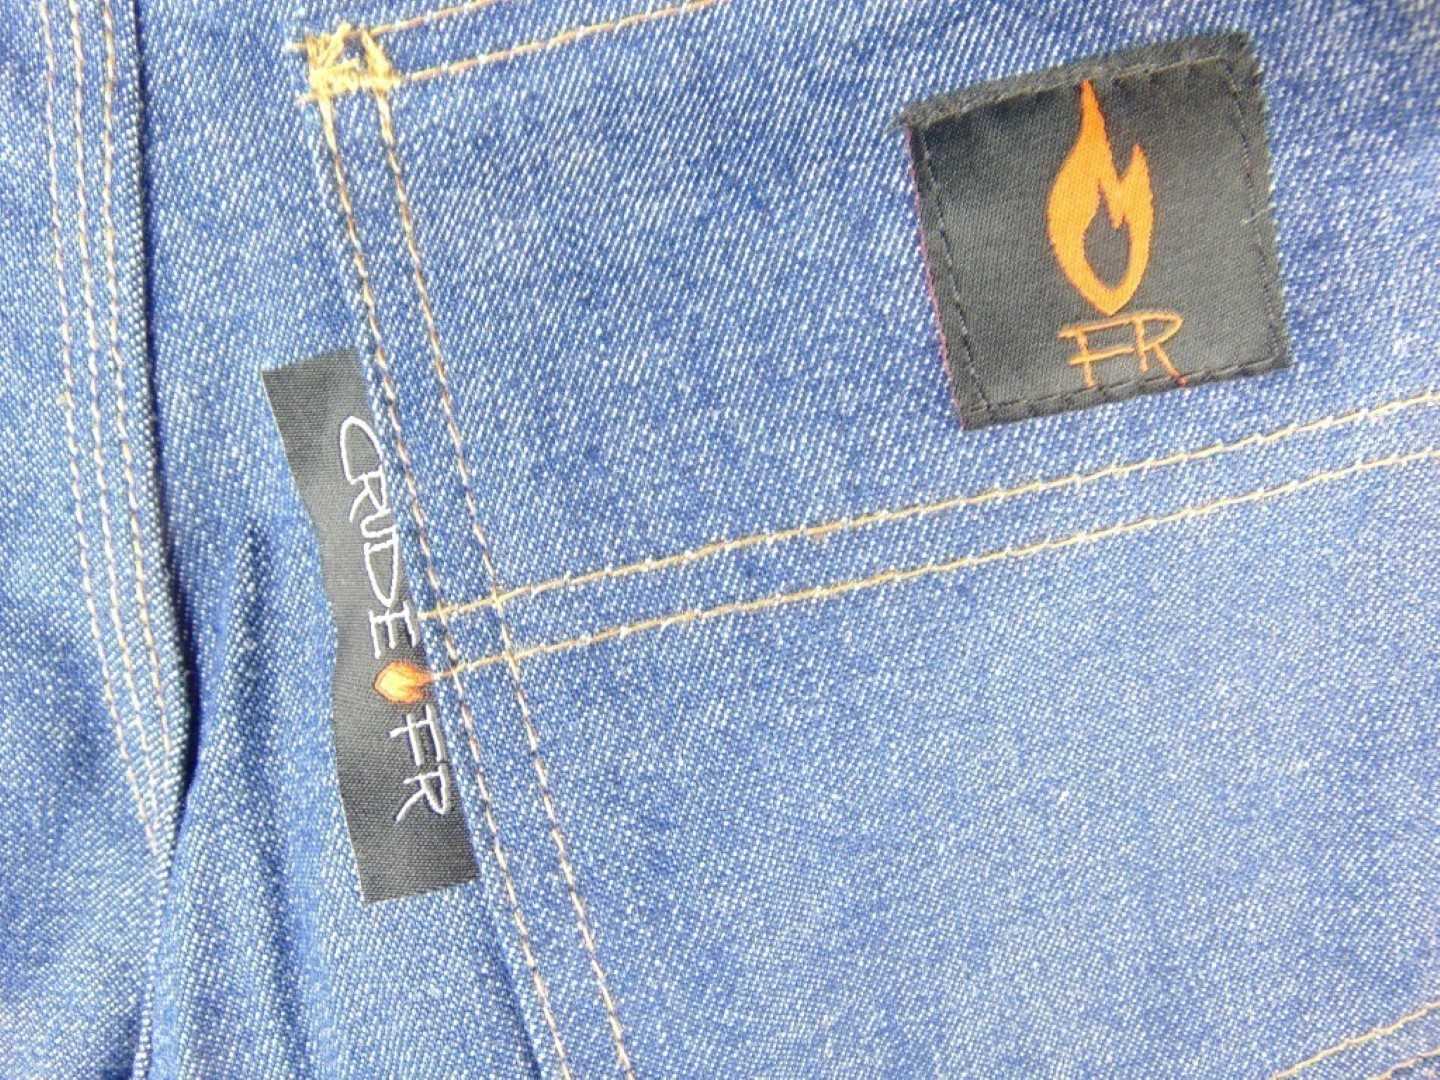 28x38U CRUDE FR / Flame Resistant Jeans (Unfinished Seam)